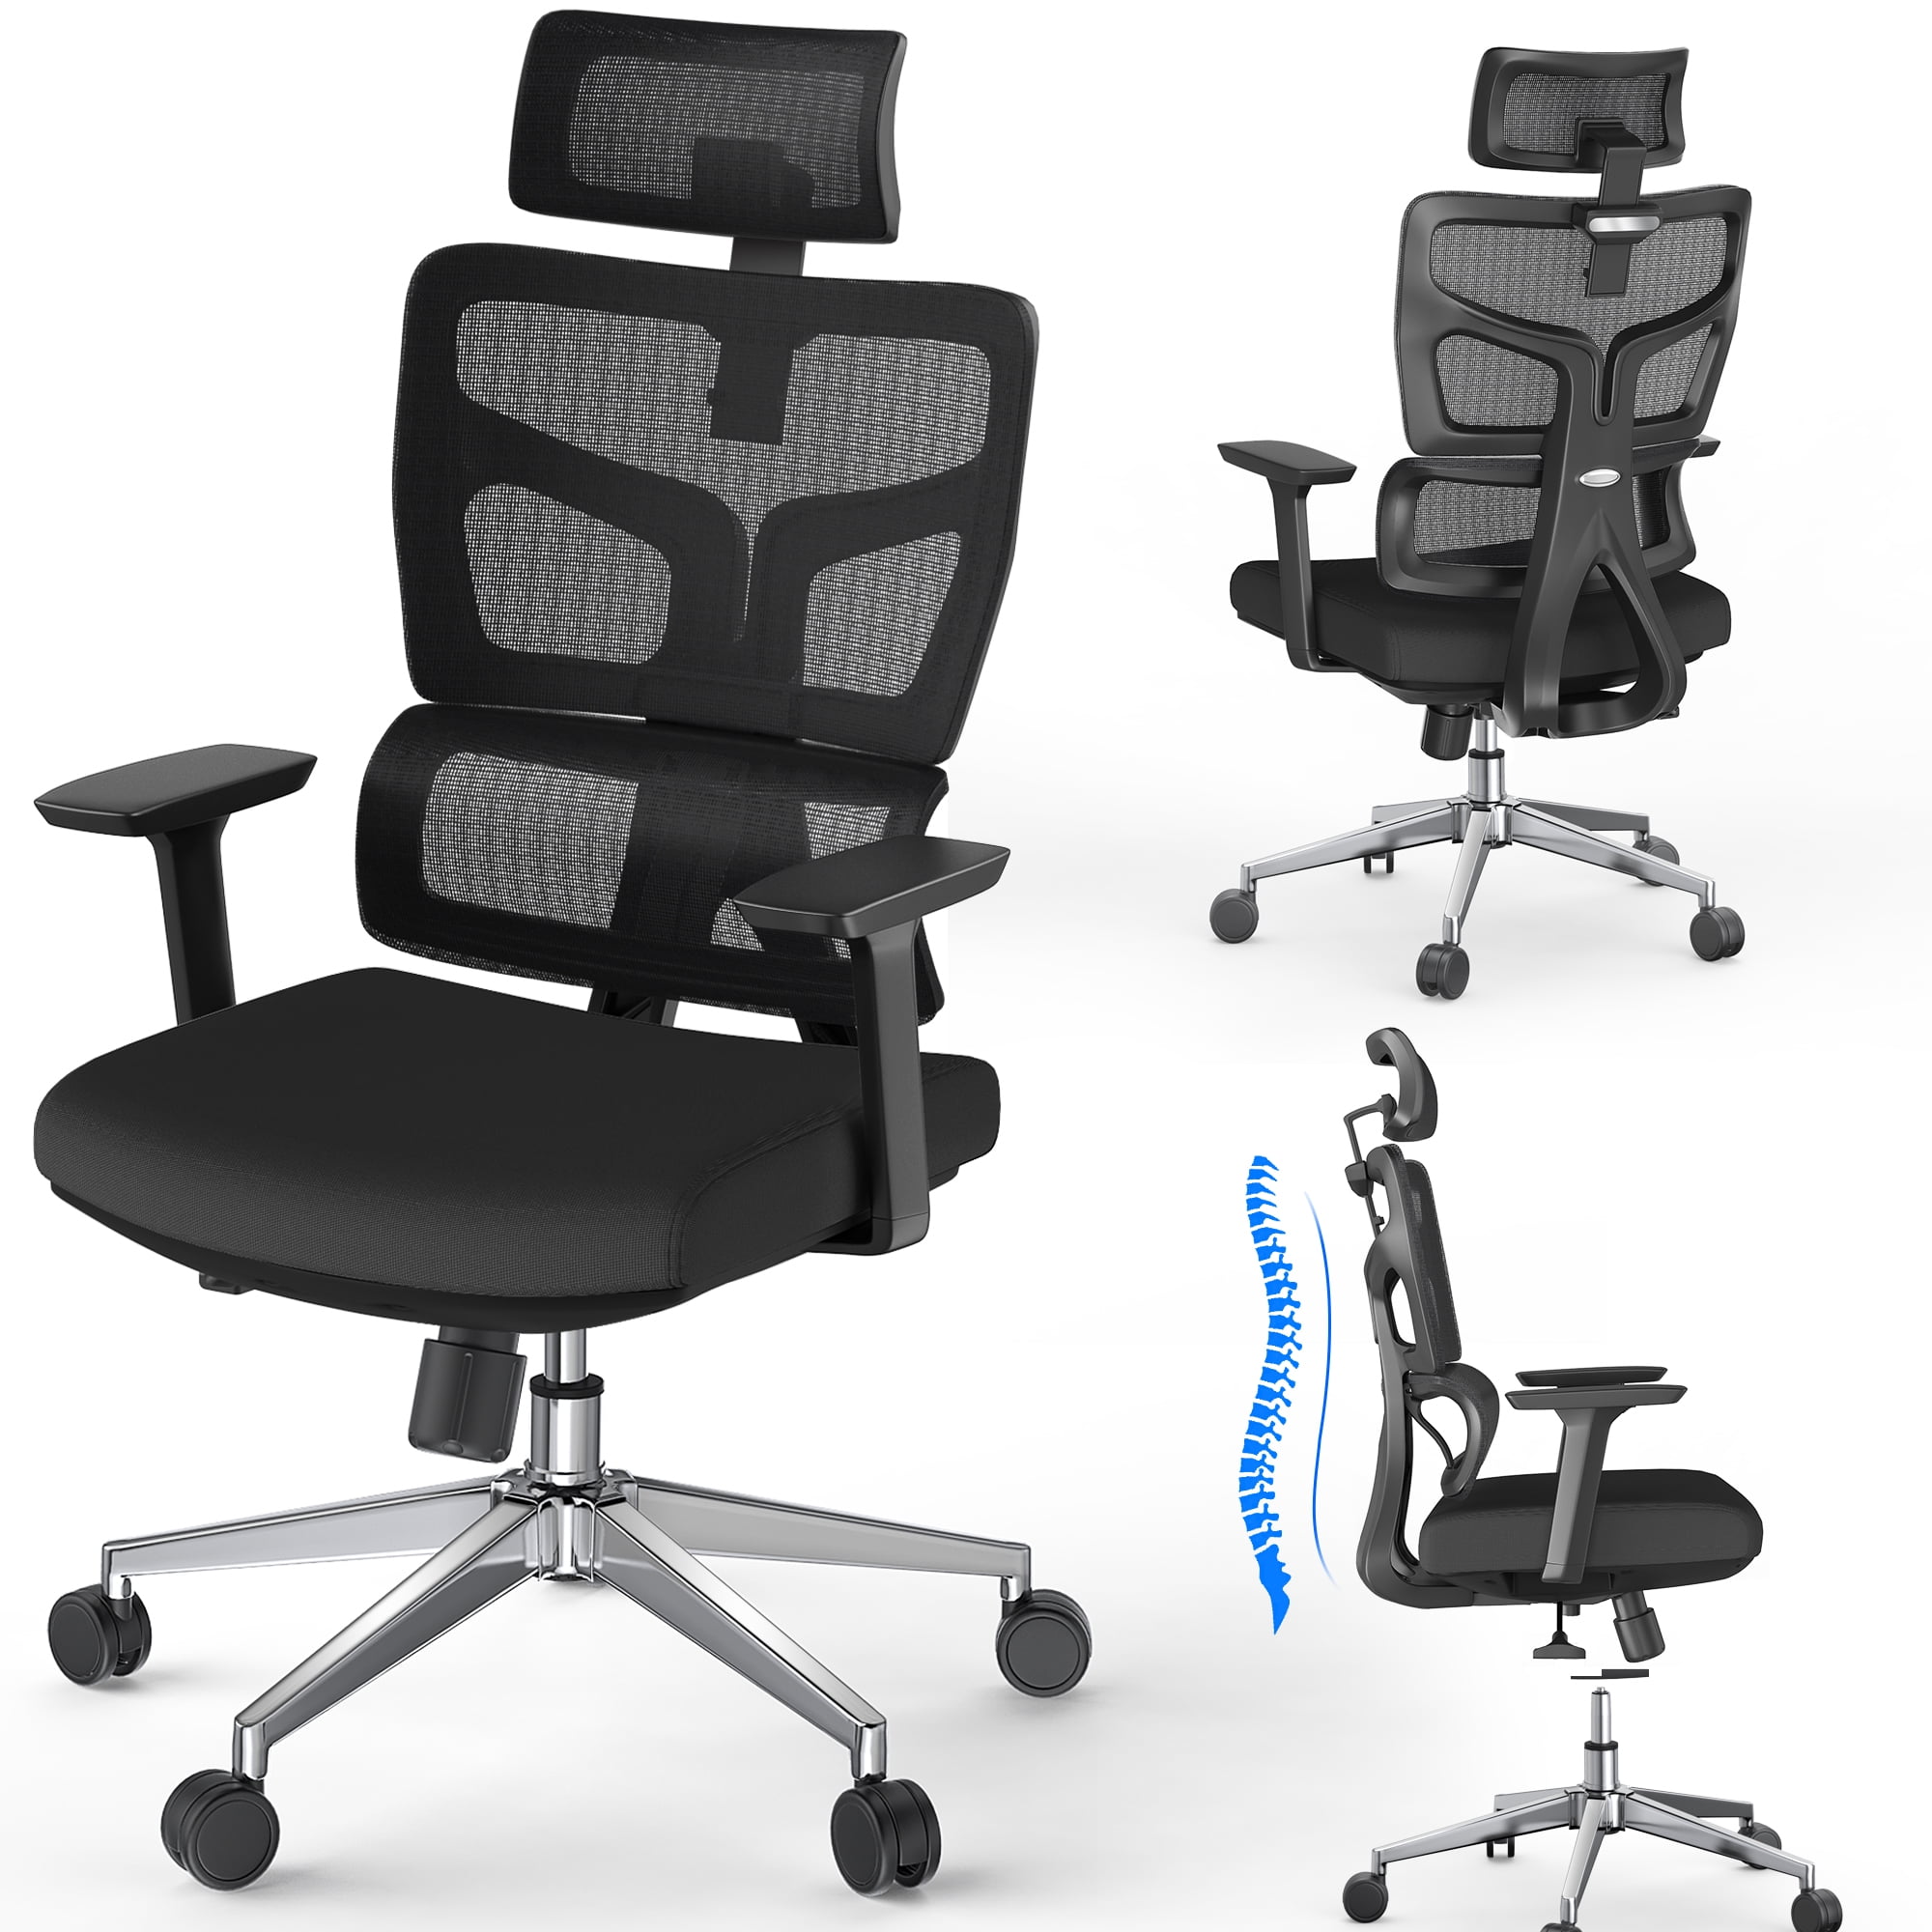  Office Chair with Foot Rest, Rubber Wheels Desk Chair with  Lumbar Support, Adjustable Headrest & 3D Armrest, Mesh Computer Chair for  Adults, Reclining Home Office Chair BlackGray : Home & Kitchen